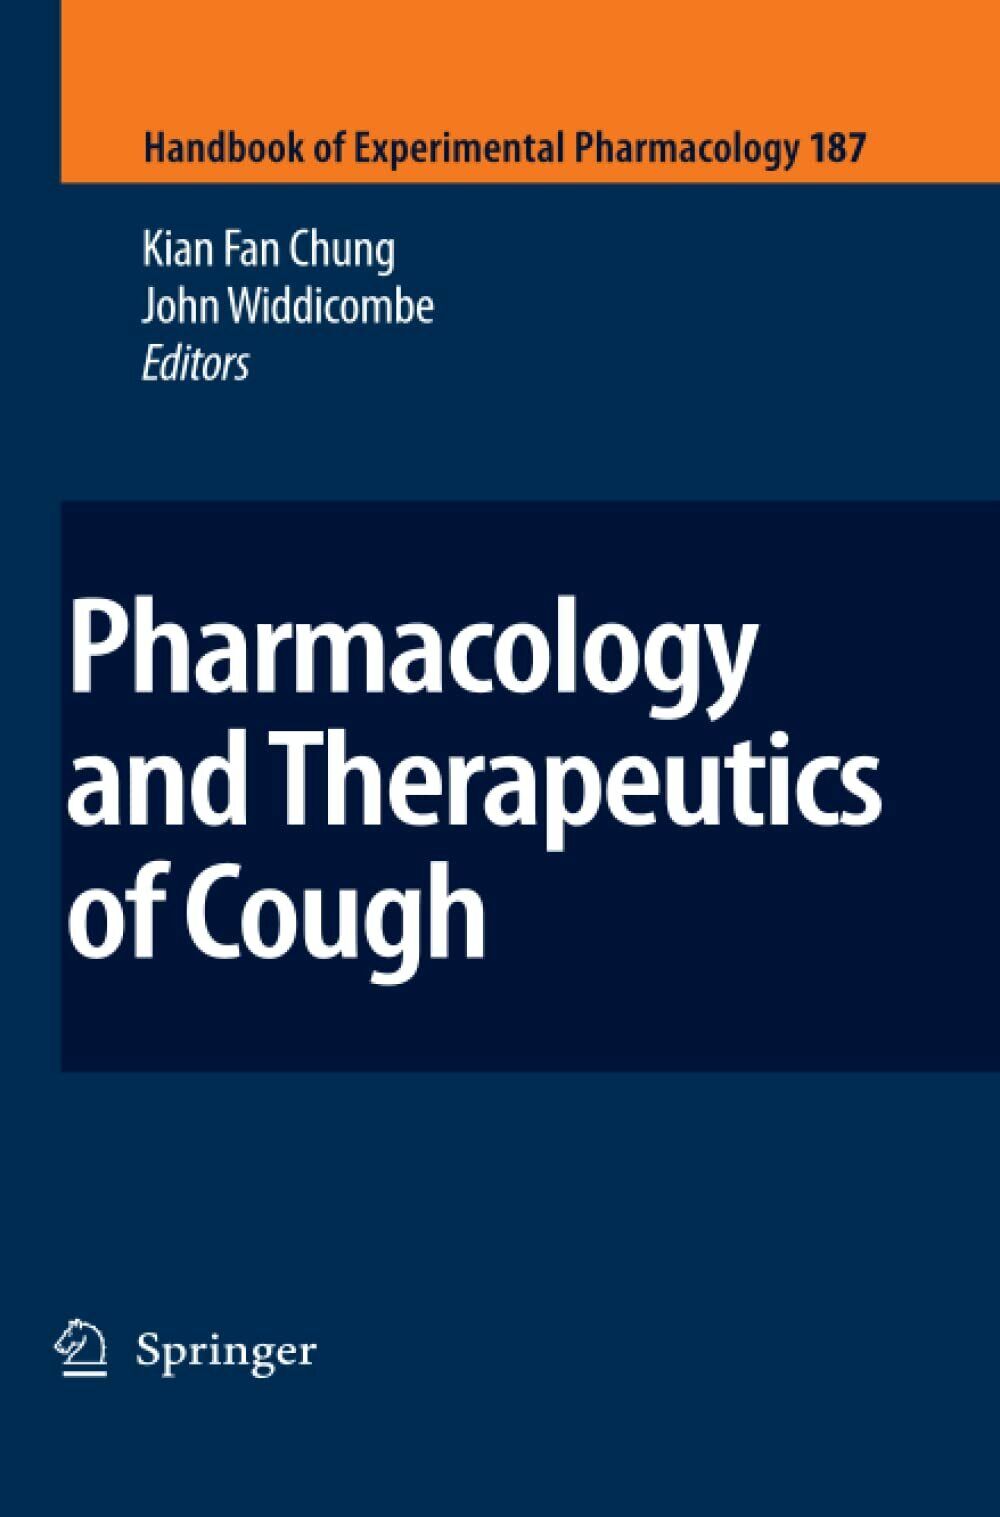 Pharmacology and Therapeutics of Cough - K. Fan Chung, John Widdicombe - 2010